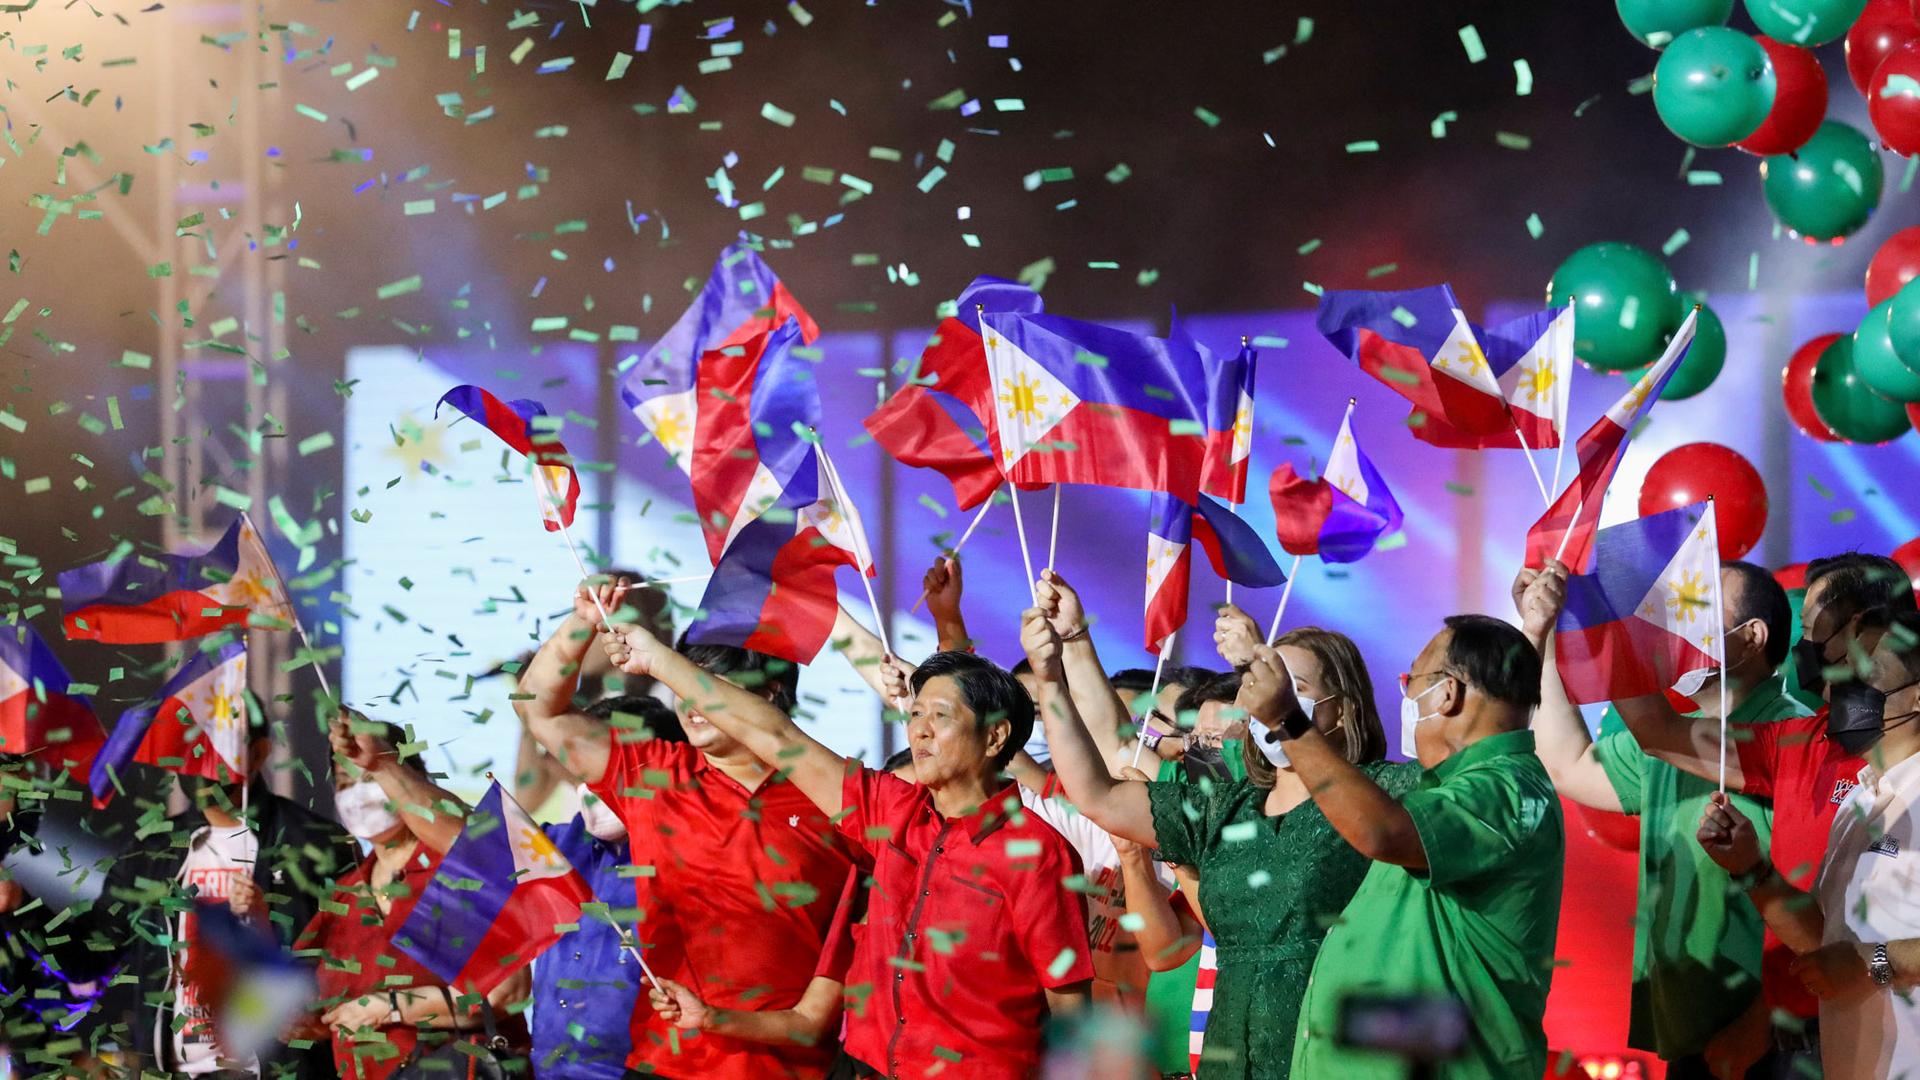 Former senator Ferdinand "Bongbong" Marcos Jr. and his team wave Philippine flags on stage during his proclamation rally promoting his presidential bid for the 2022 national elections, at Philippine Arena, Bulacan province, north of Manila, Philippines.